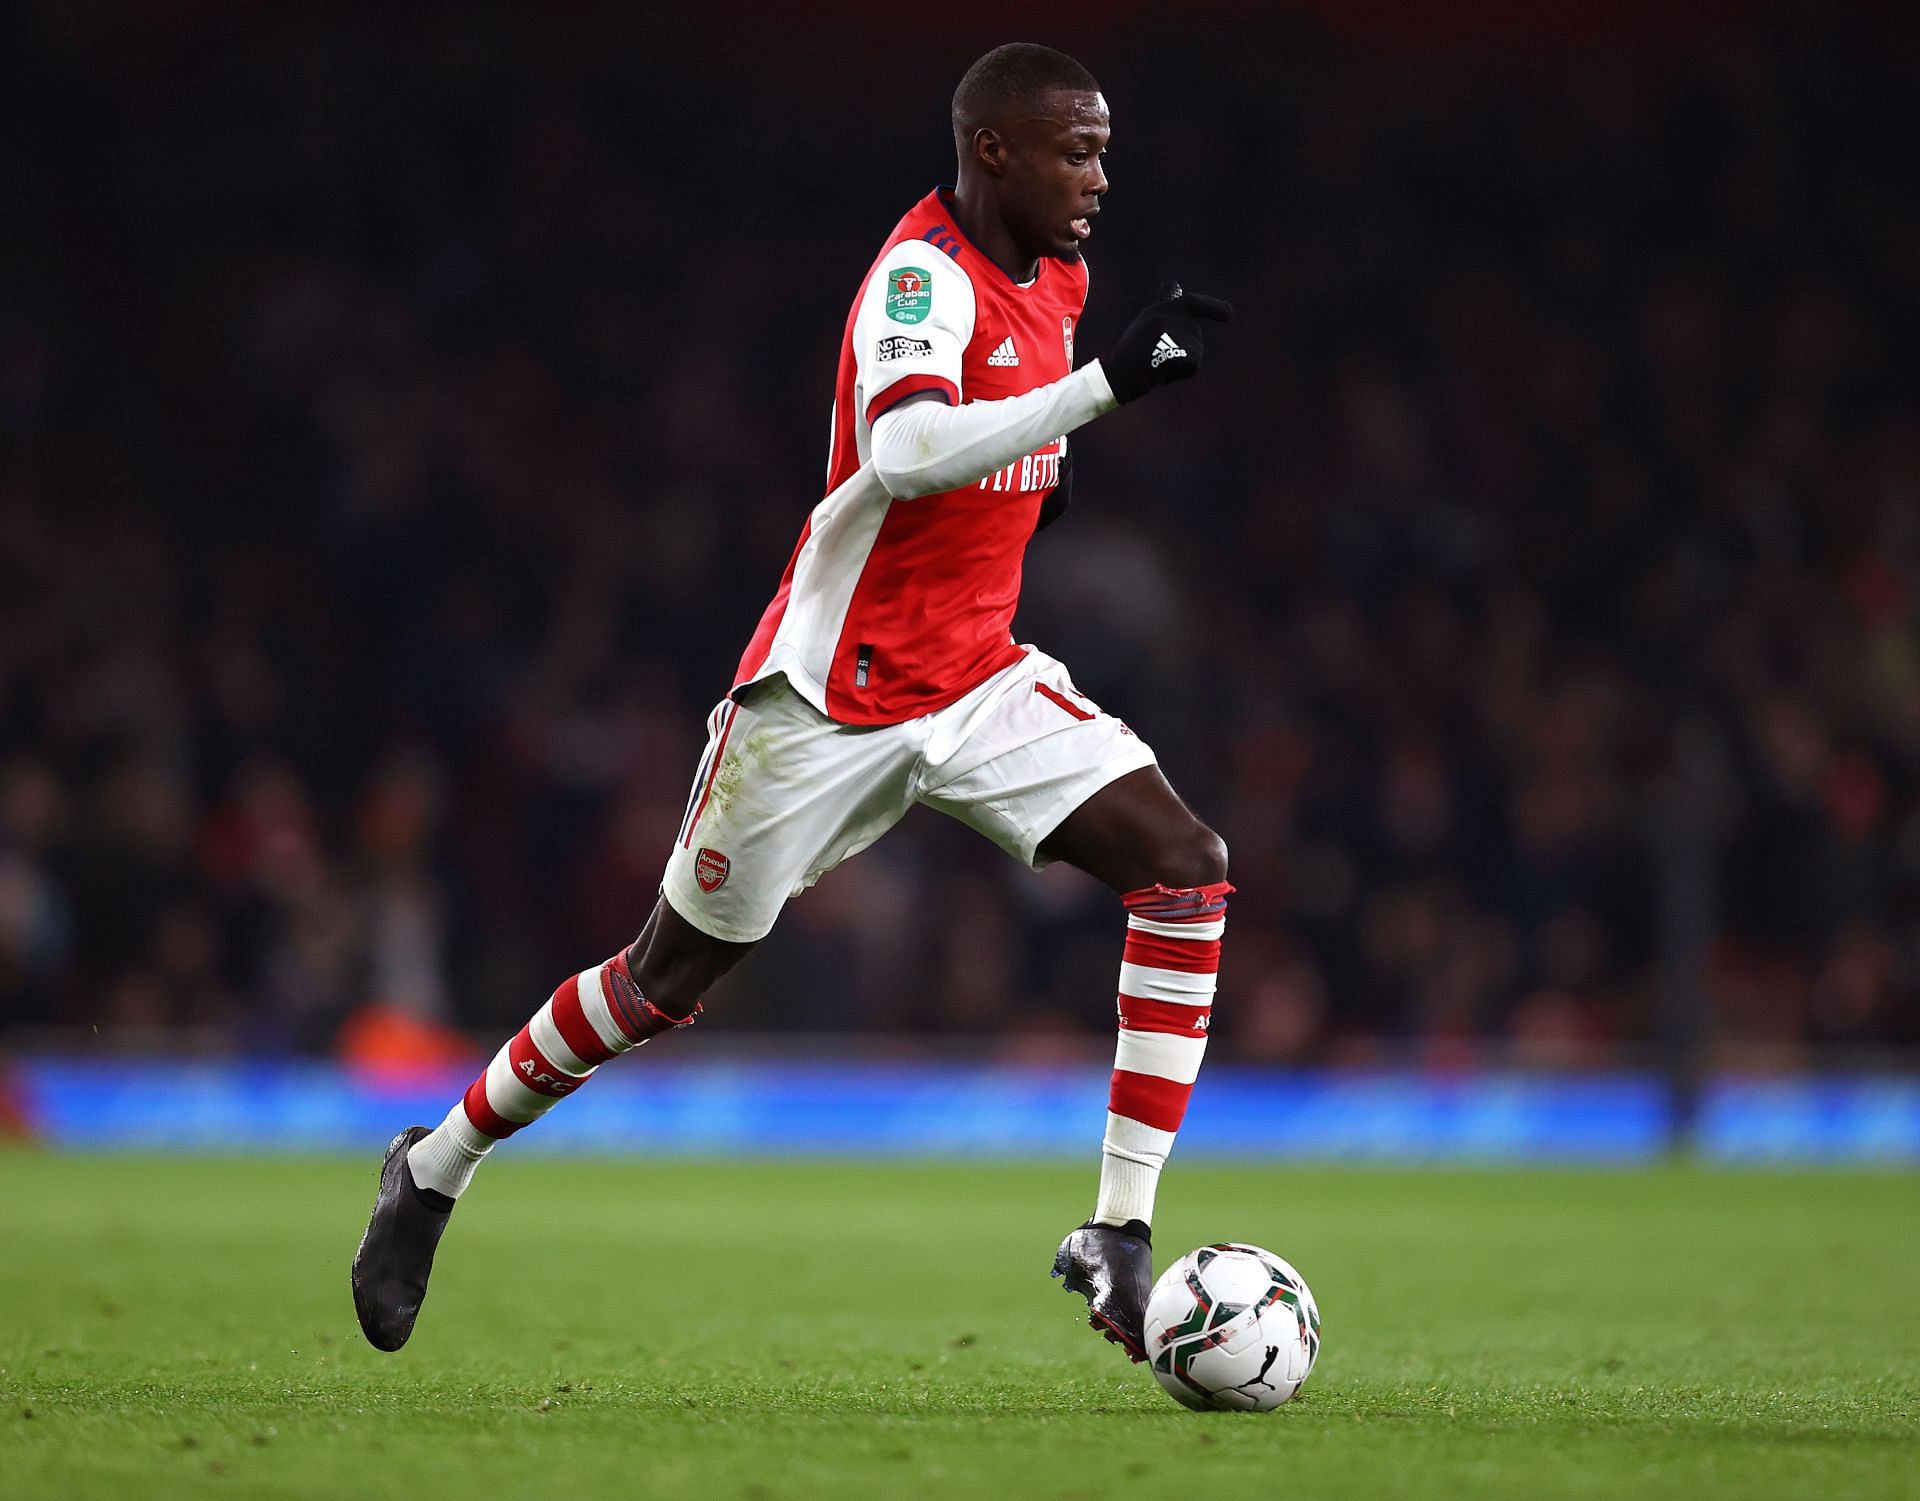 Nicolas Pepe has provided more assists than any other player in the Carabao Cup